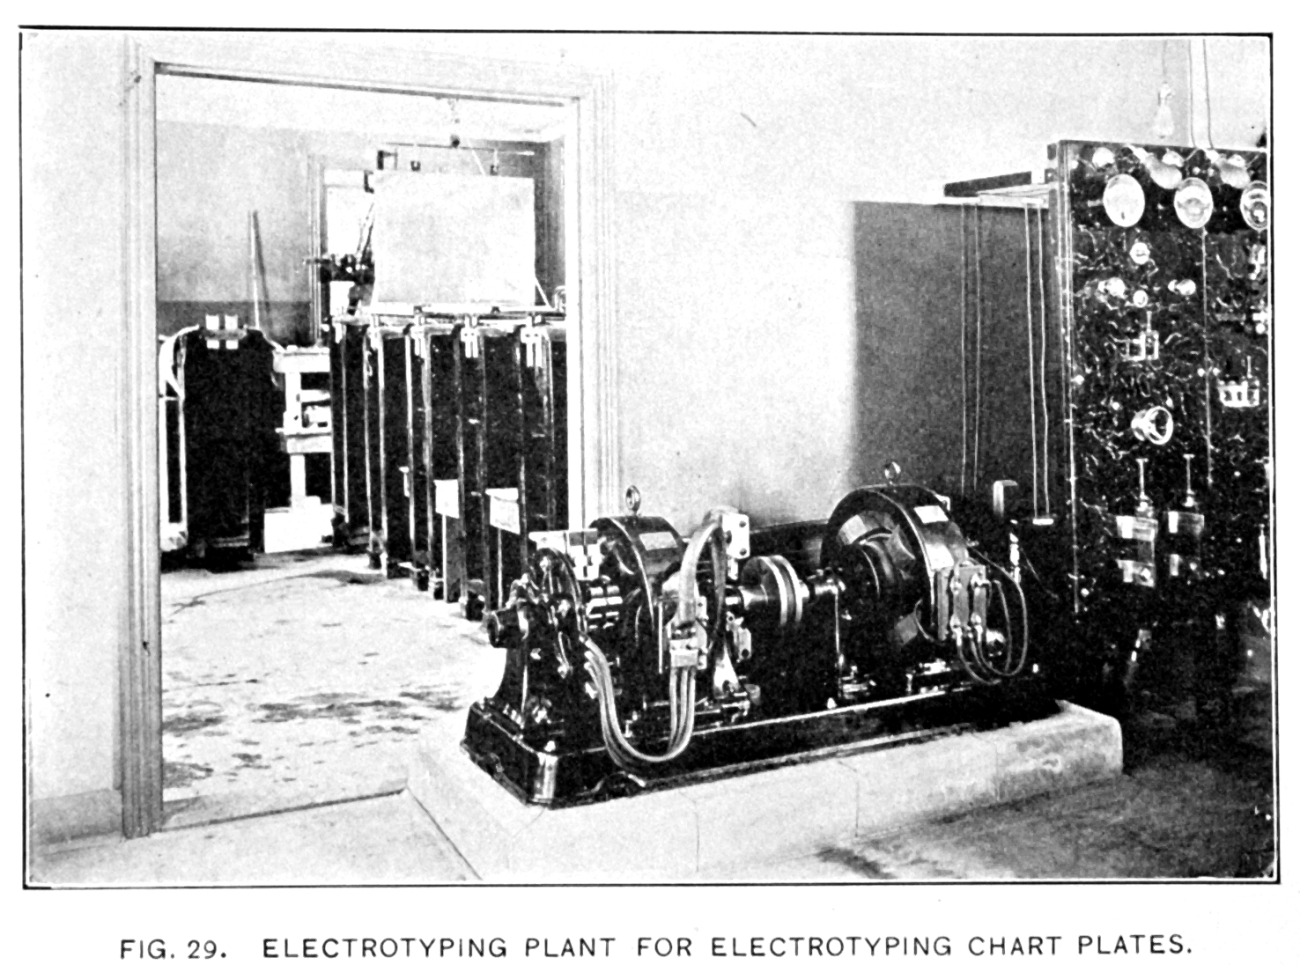 Electrotyping plant for electrotyping chart plates